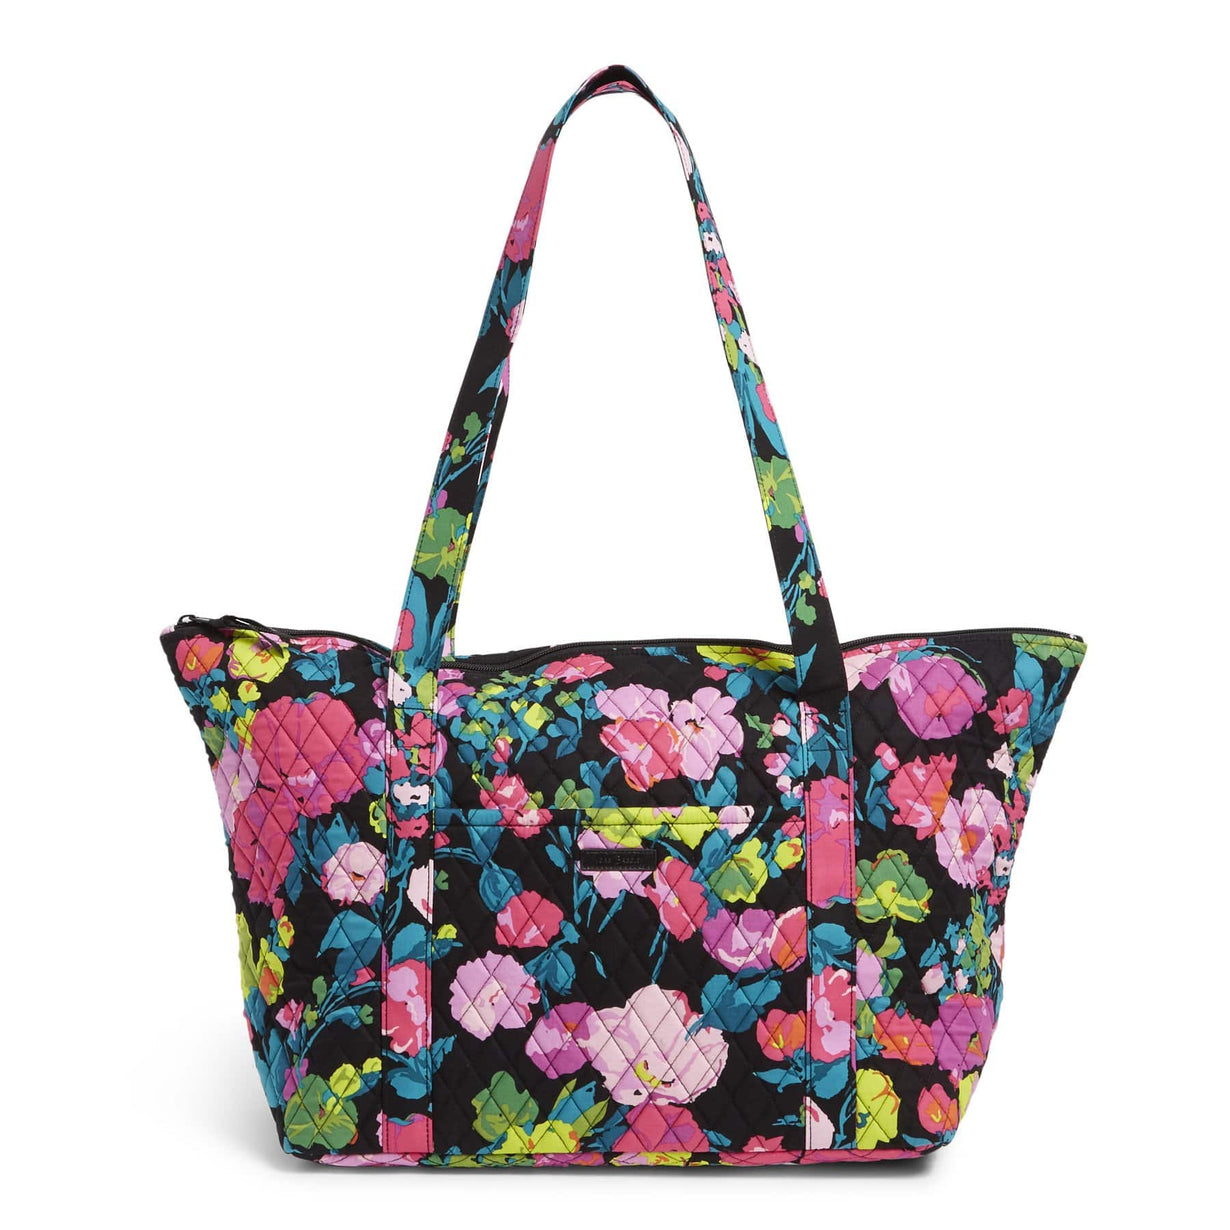 Vera Bradley Factory Style Carry-On Travel Tote Bag only $28.00 ...